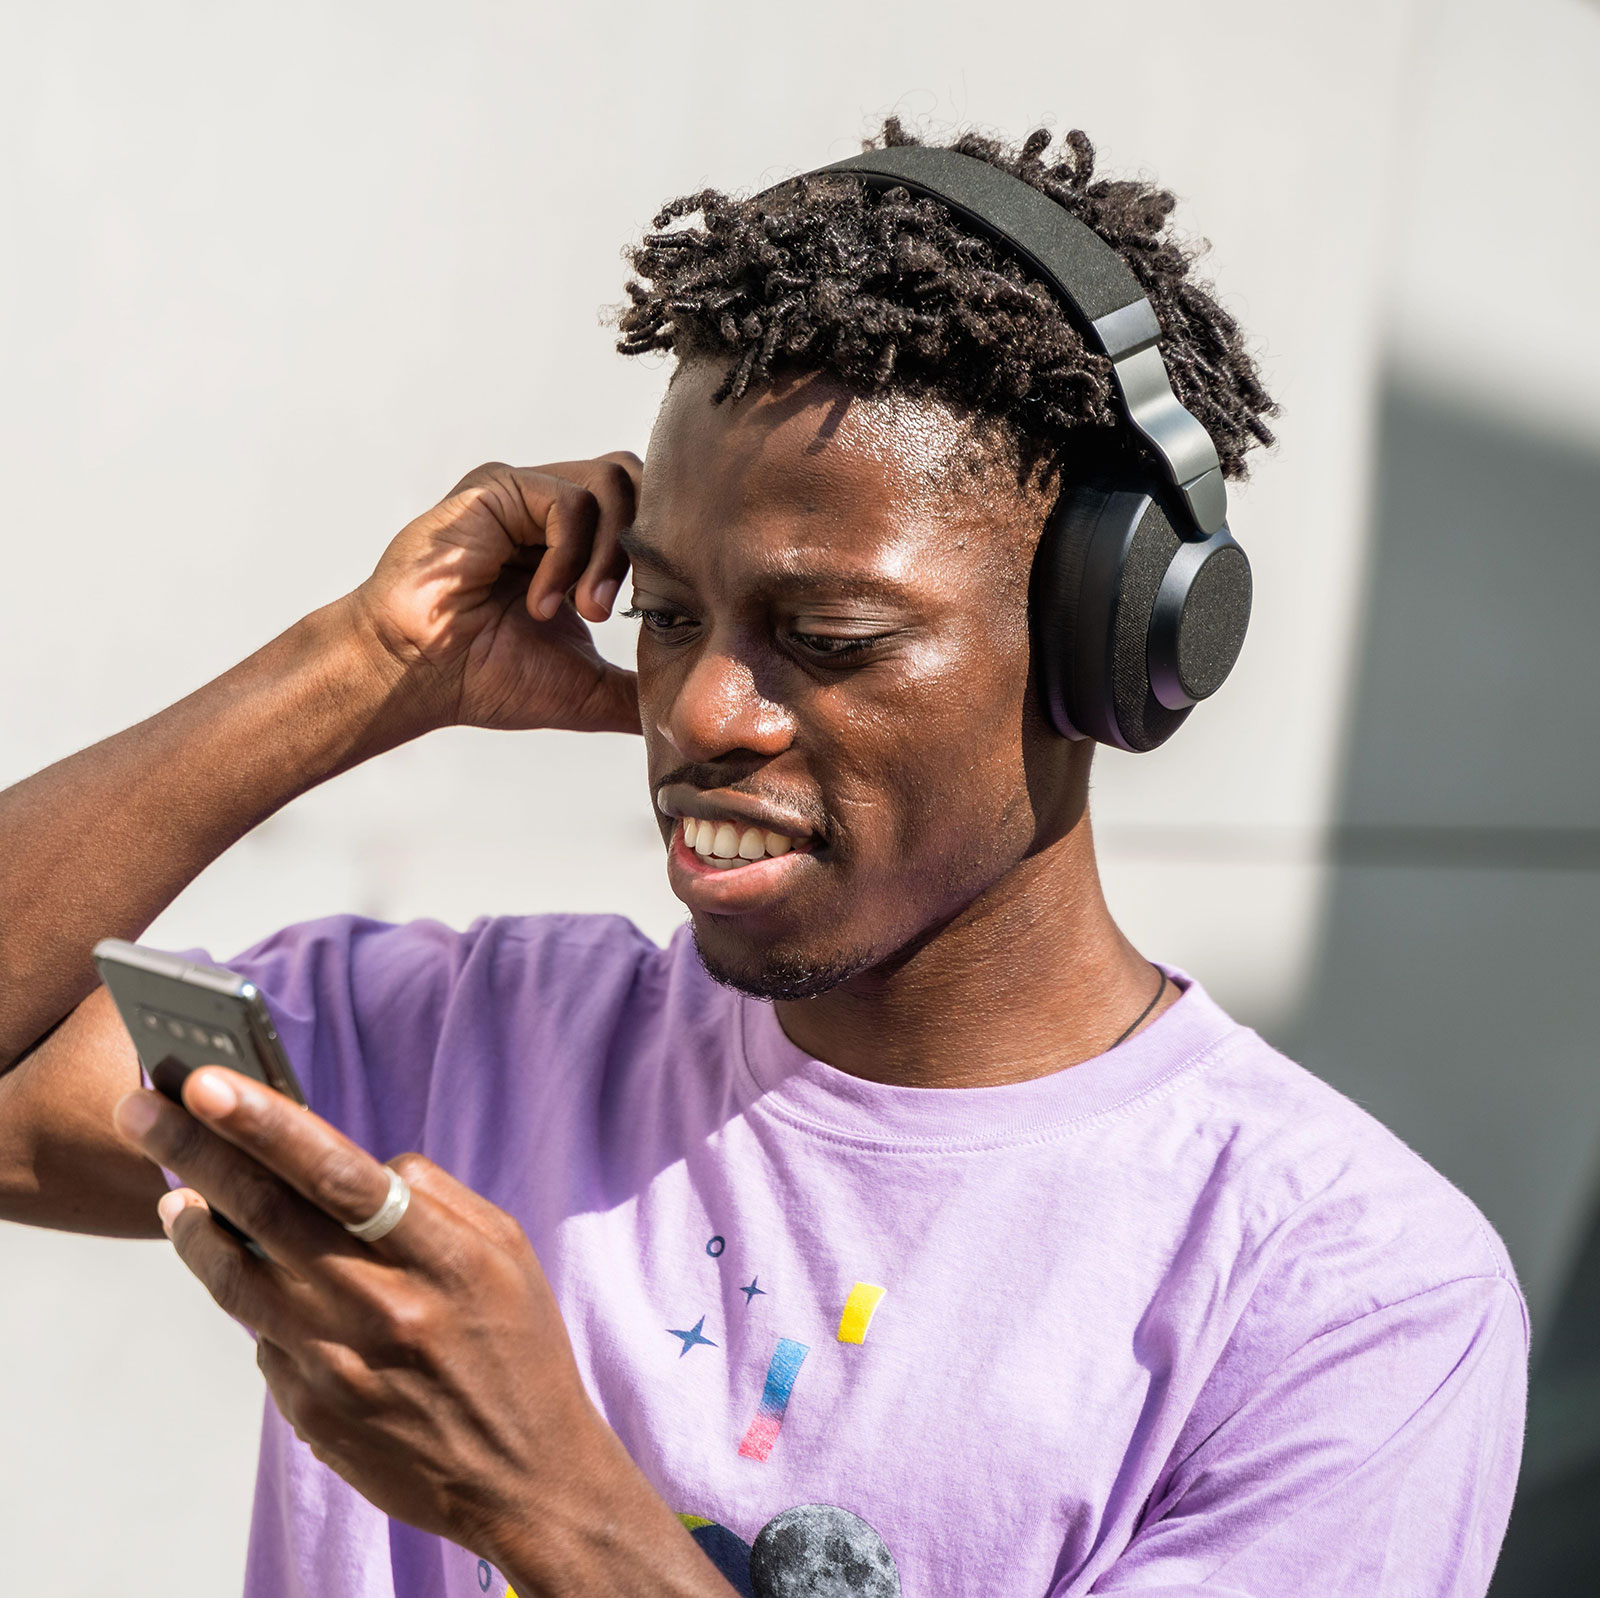 A young black man in a purple shirt with short dreadlocks is looking at his phone with interest and wearing over-ear headphones.